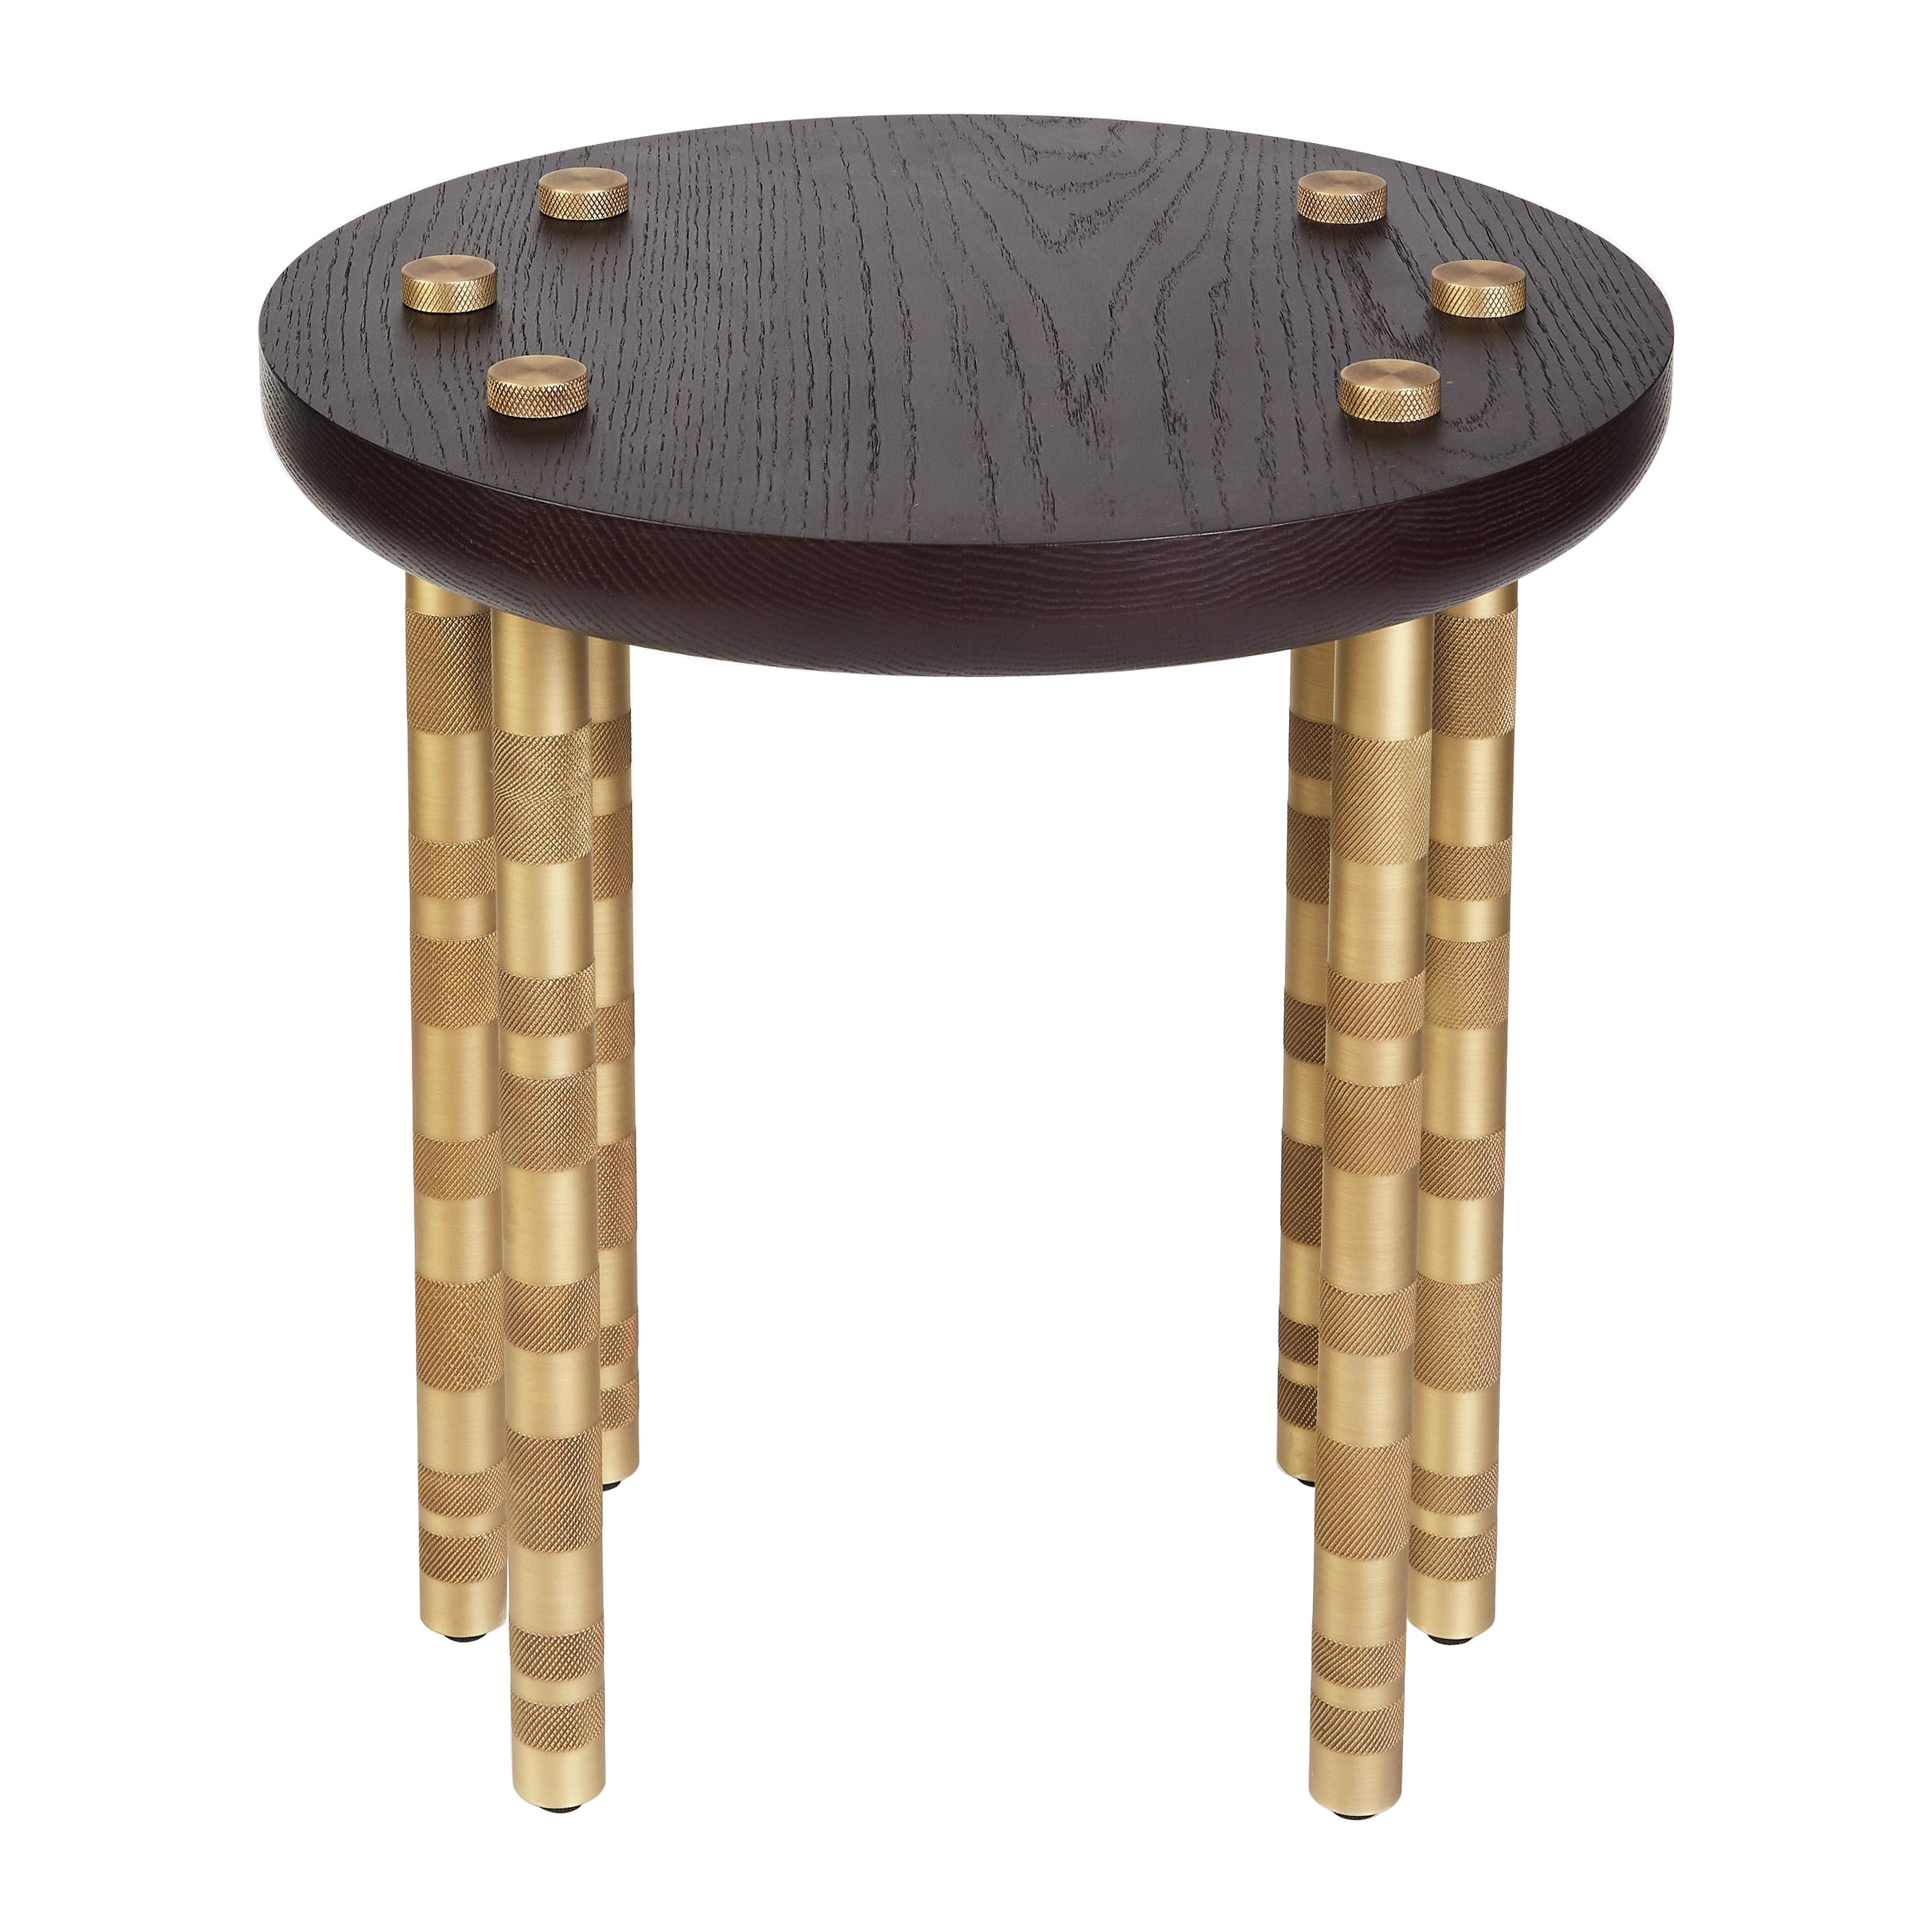 Ipanema Brass Side Table, Wood Top and Brushed Brass Legs, Handcrafted by Duistt